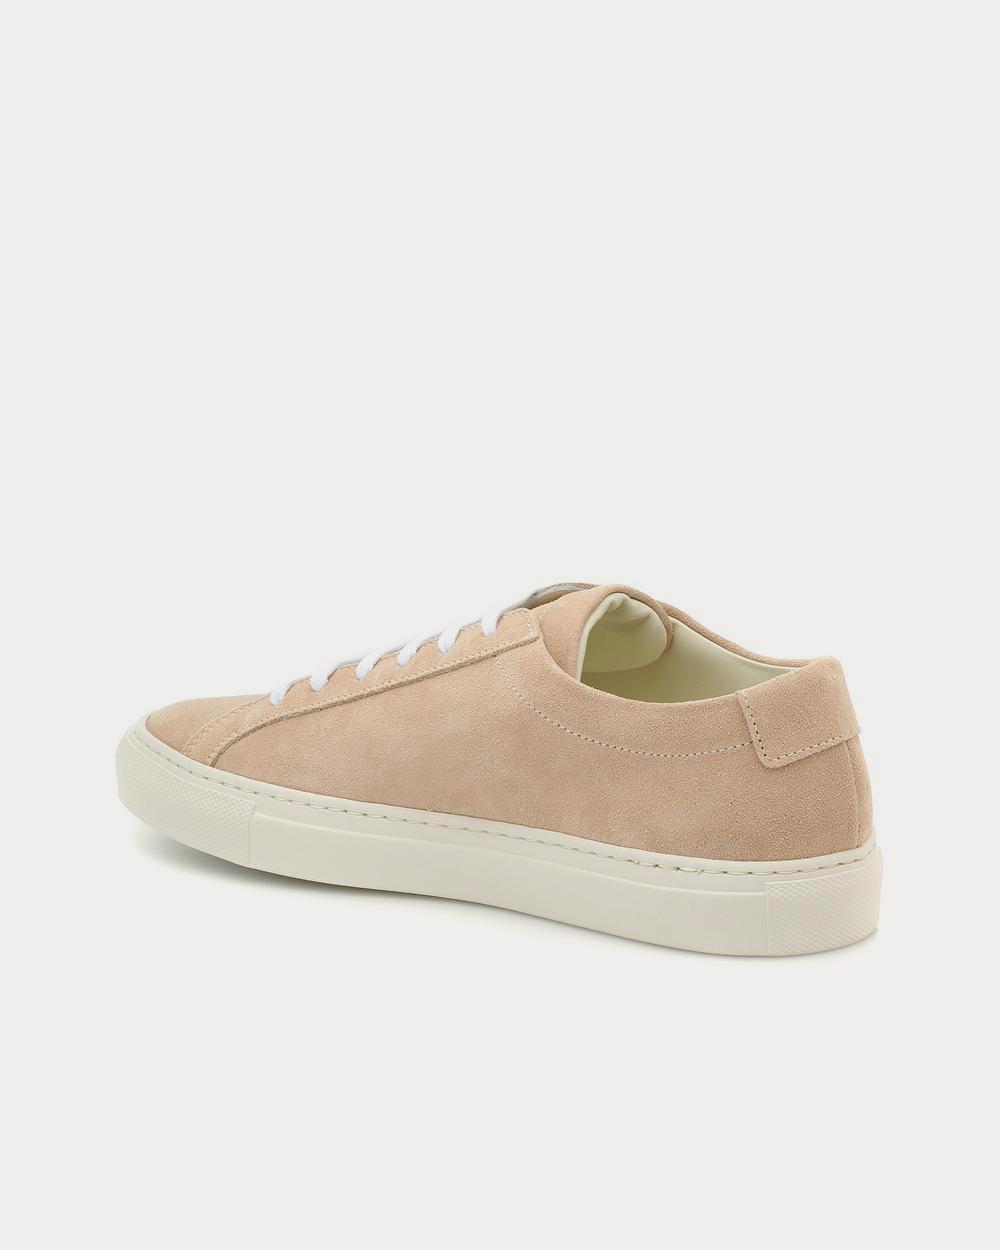 Common Projects - Original Achilles suede Amber Low Top Sneakers